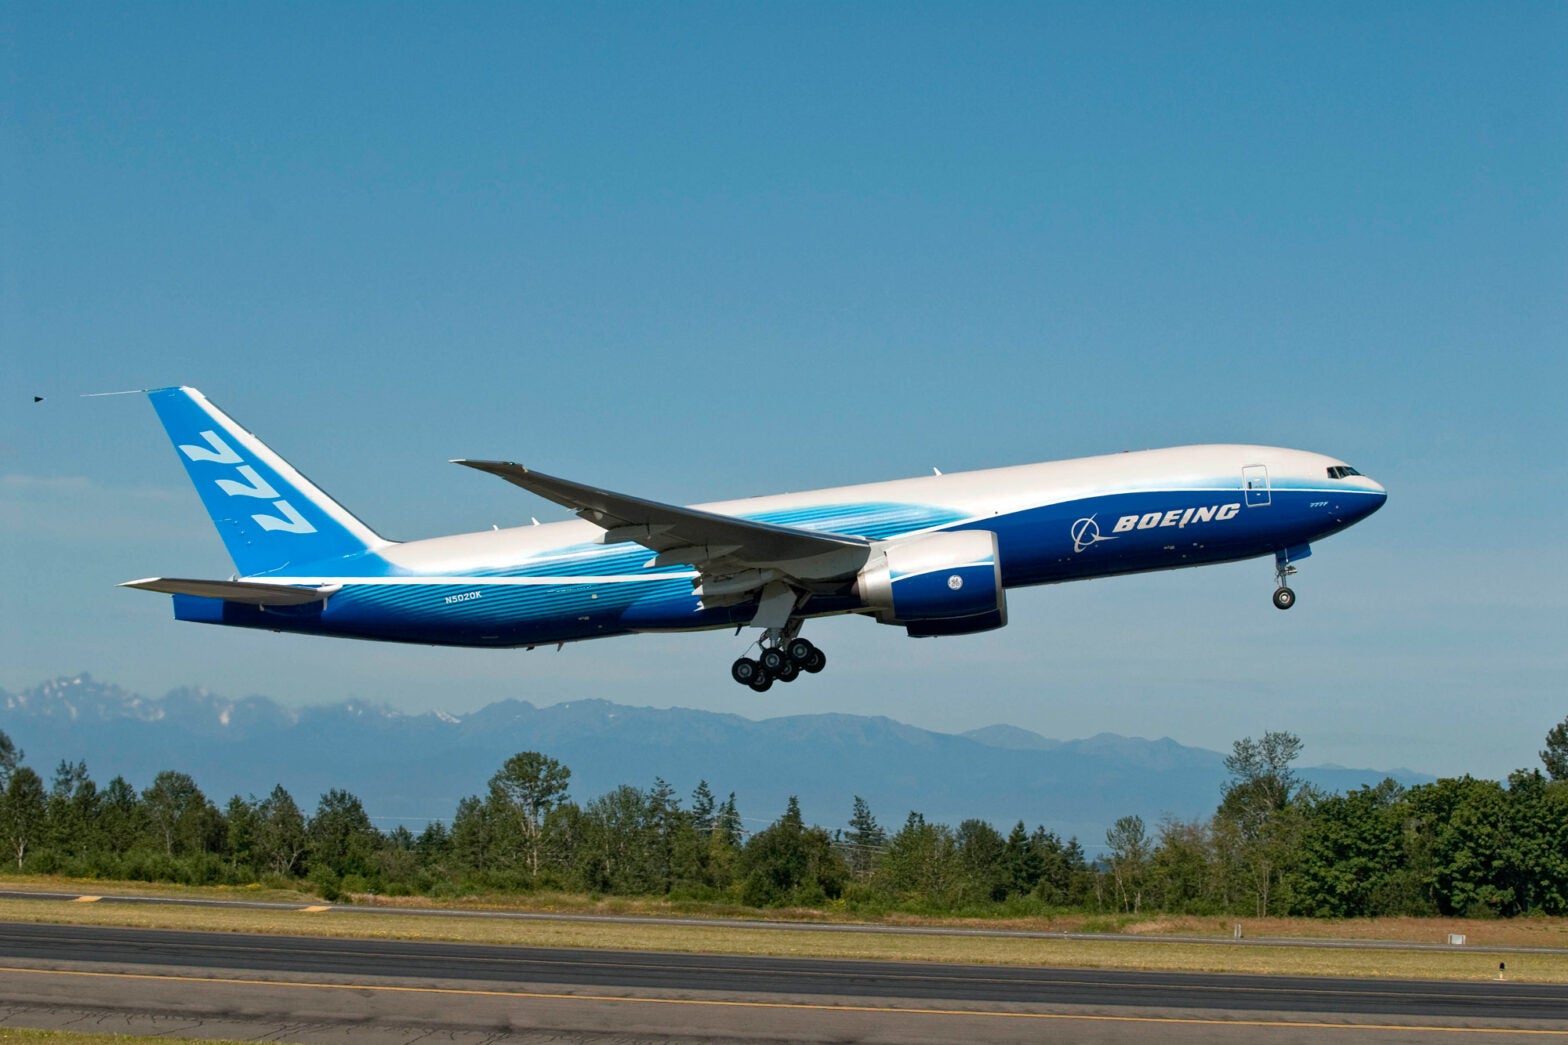 Boeing’s 777 Back in the News Over Maintenance Issue